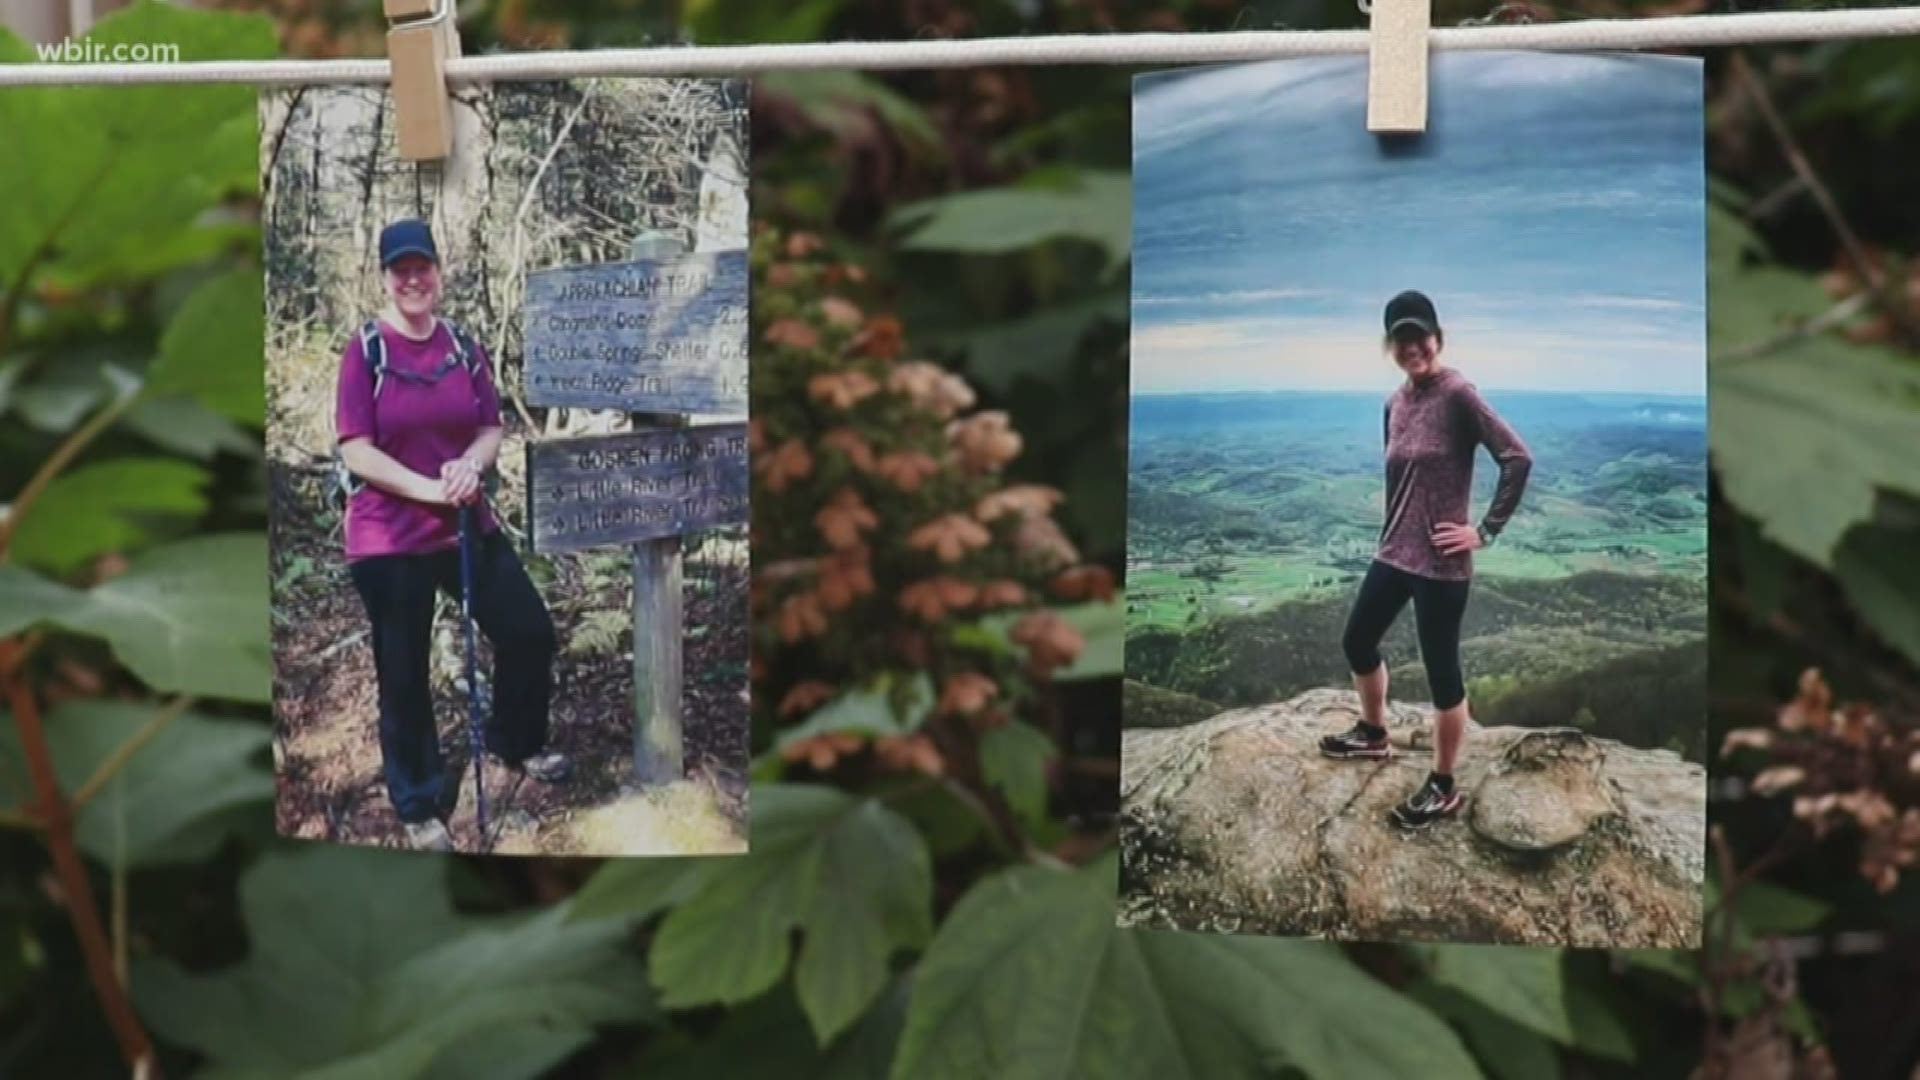 An Alcoa woman looks like a completely different person from her pictures three years ago after losing 70 pounds hiking in the Great Smoky Mountains National Park!